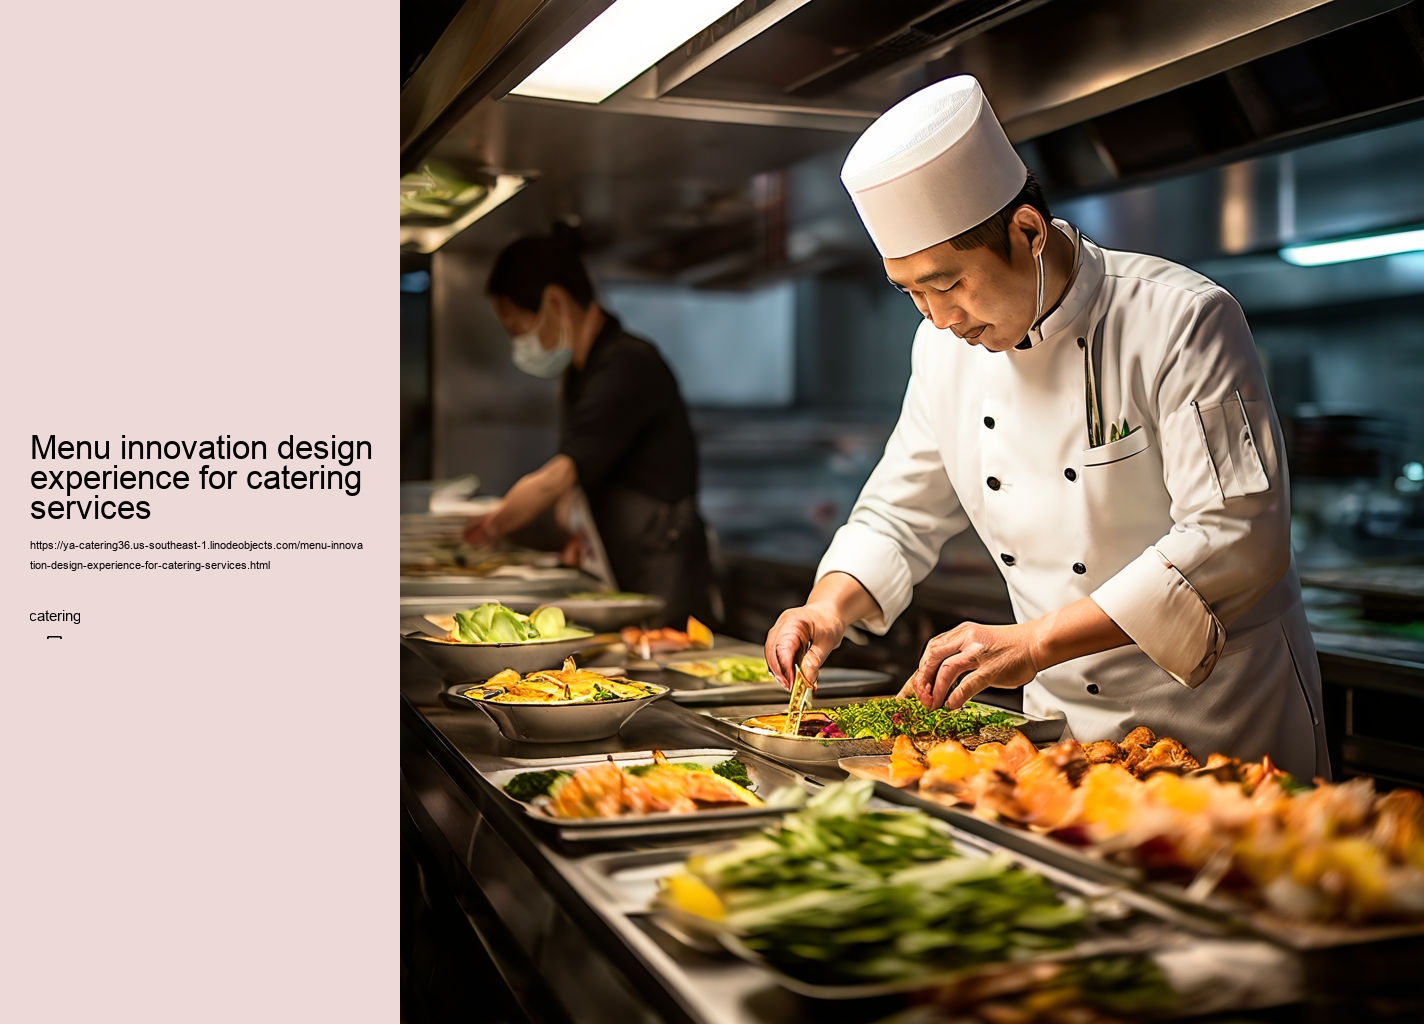 Menu innovation design experience for catering services